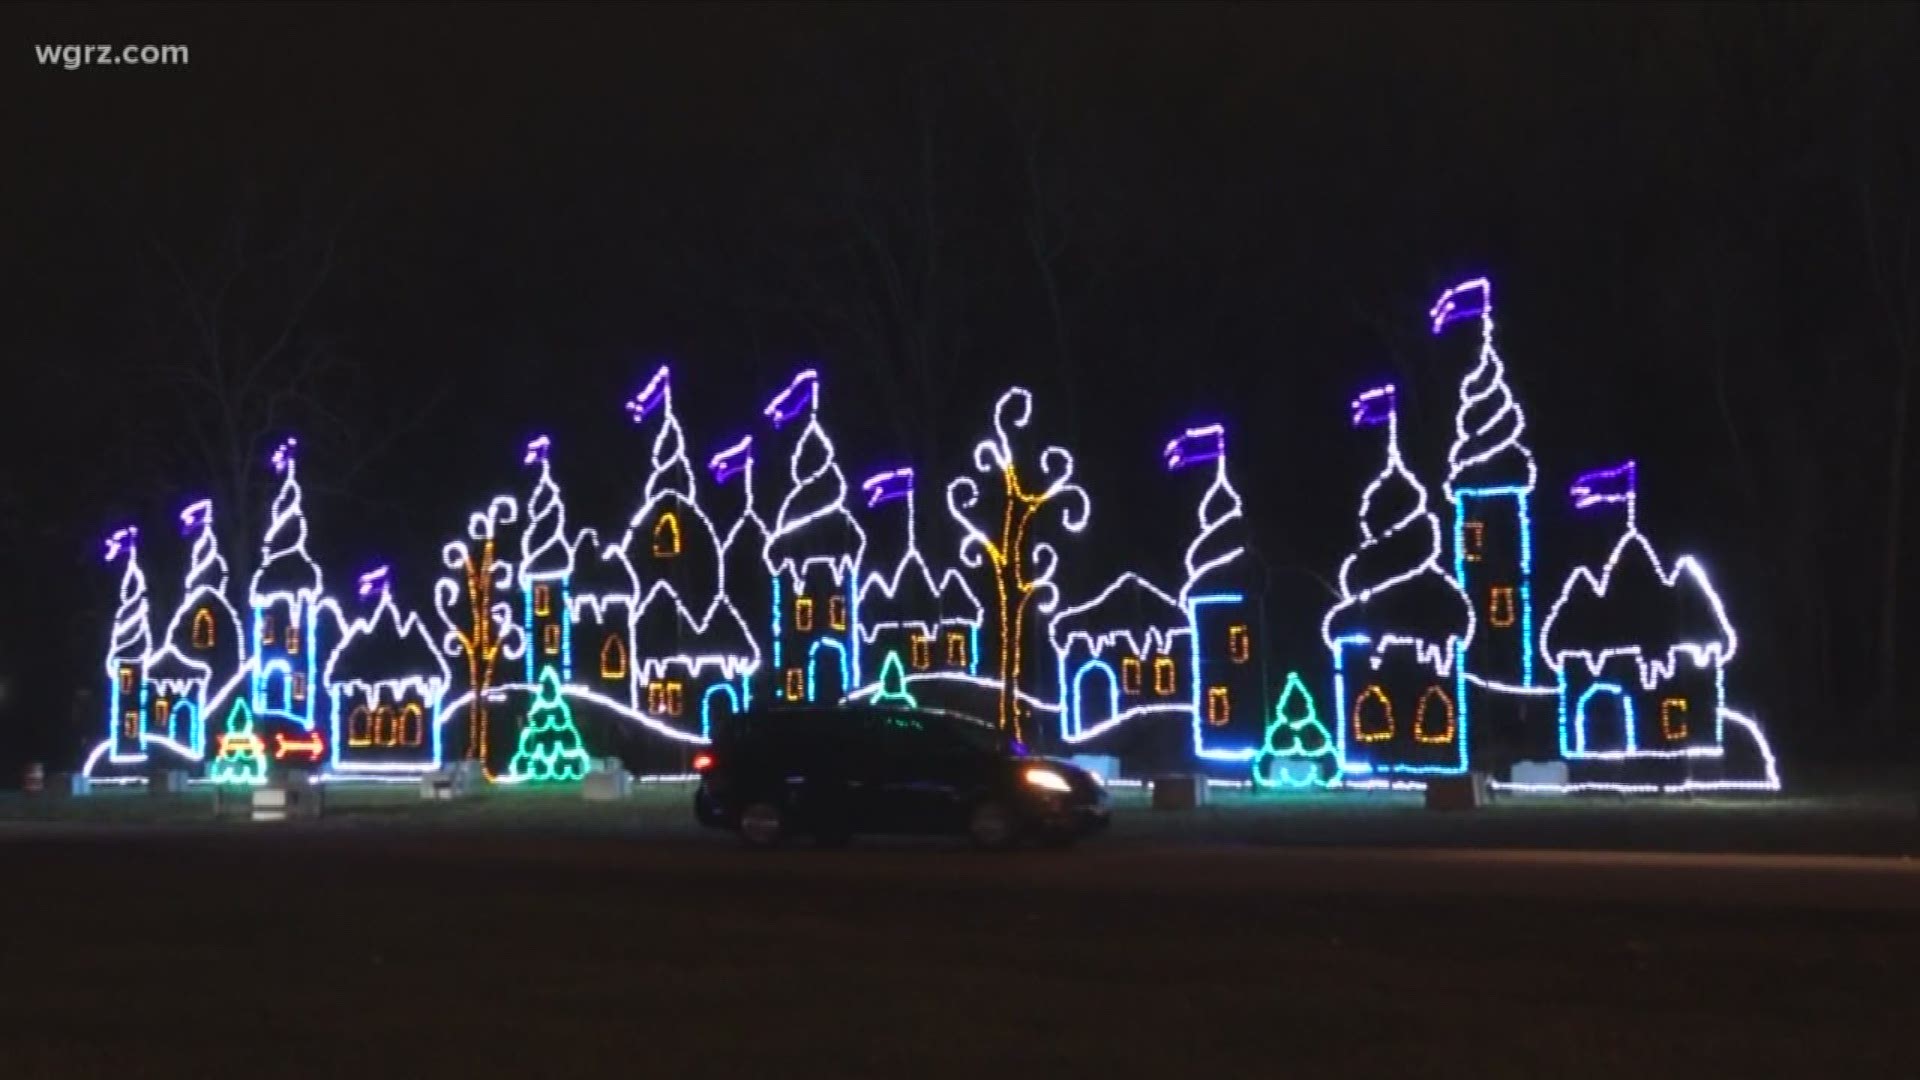 A holiday favorite event is back in WNY for another year. Festival of Lights at the Hamburg Fairgrounds. This year's festival features more than a million lights.